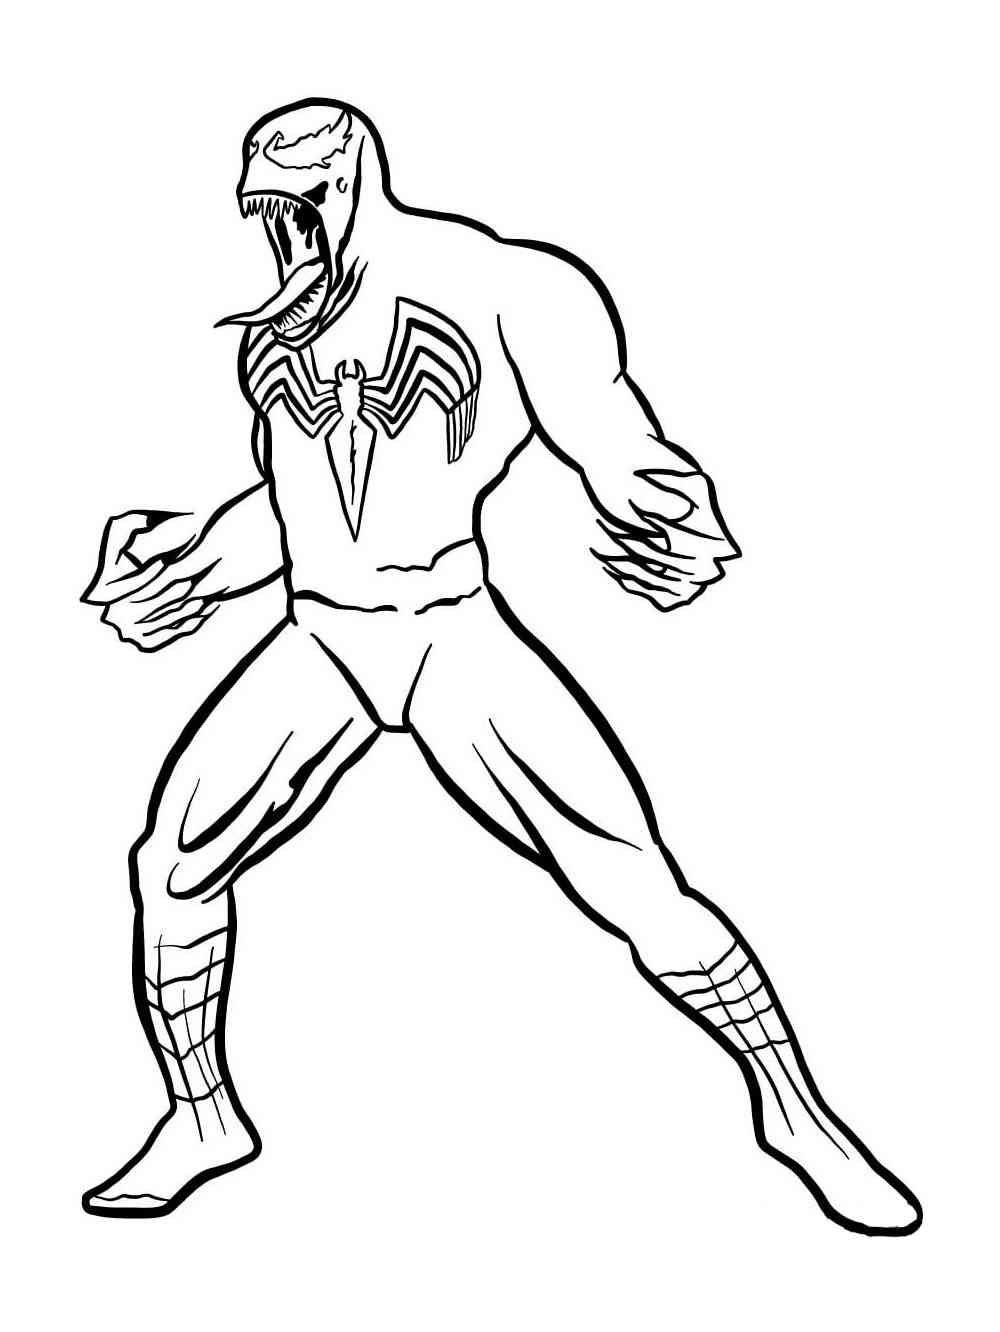 Venom coloring pages. Download and print Venom coloring pages